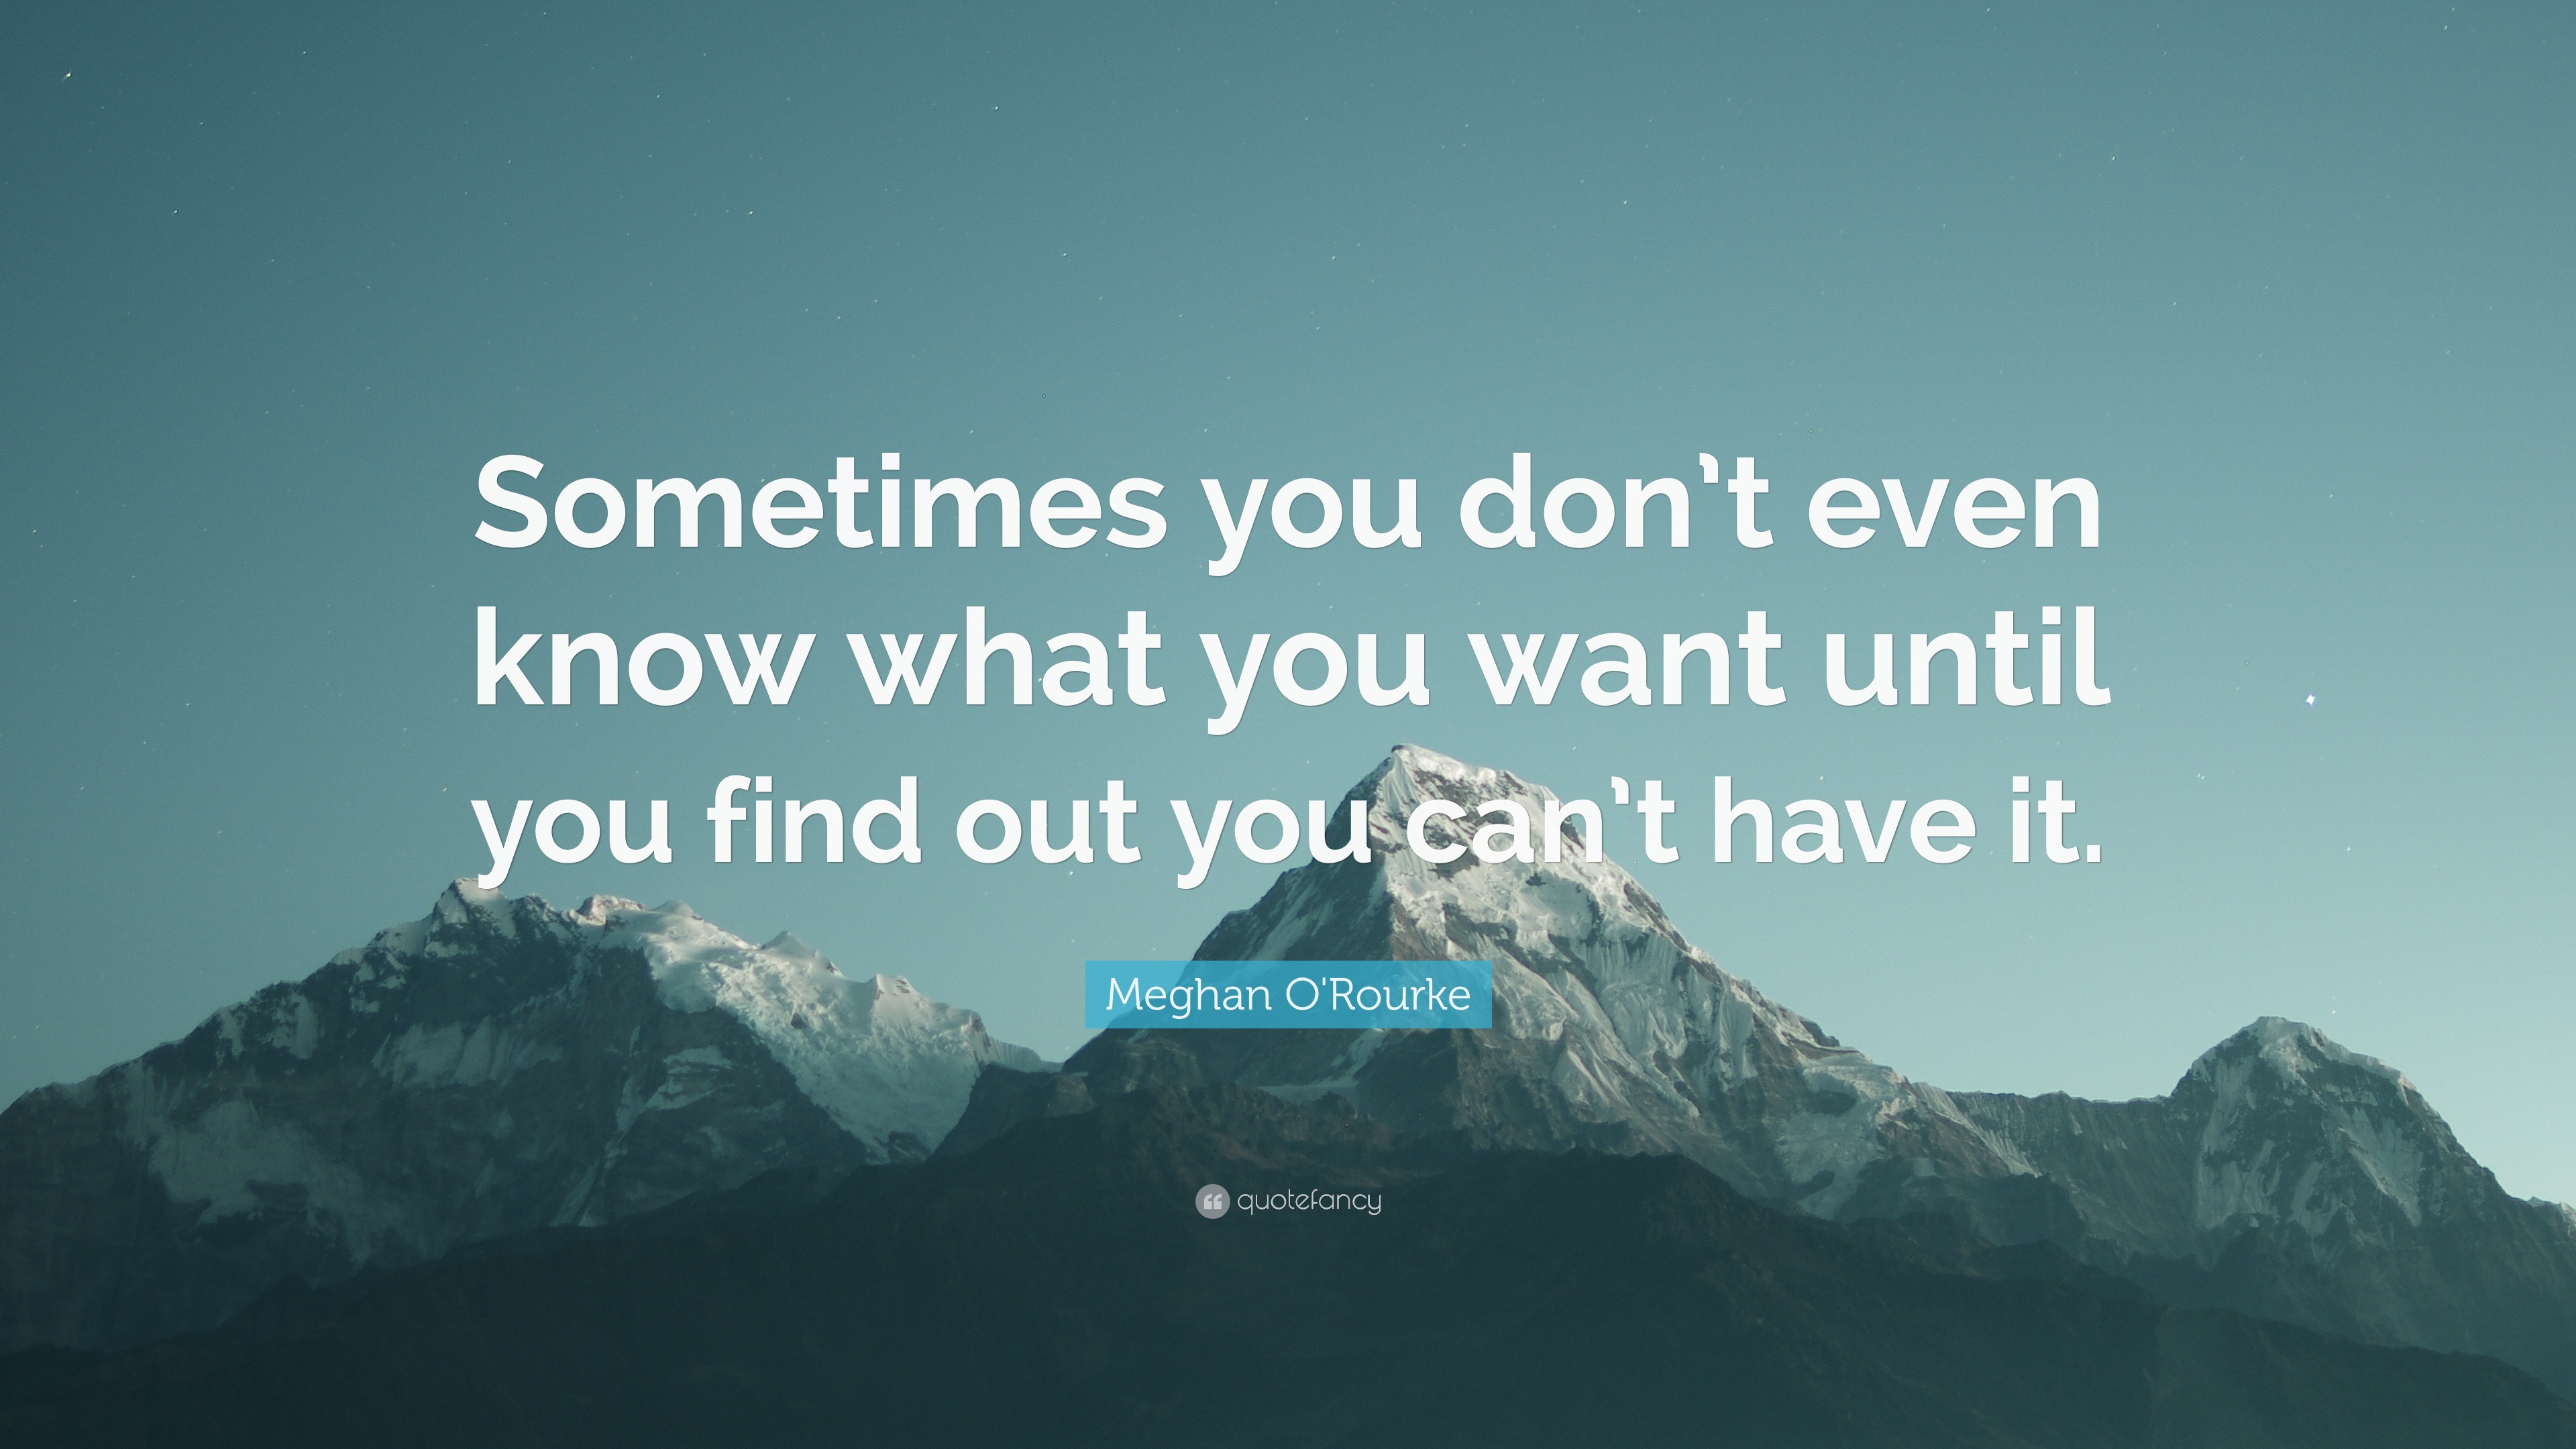 Meghan O'Rourke Quote: “Sometimes you don’t even know what you want ...